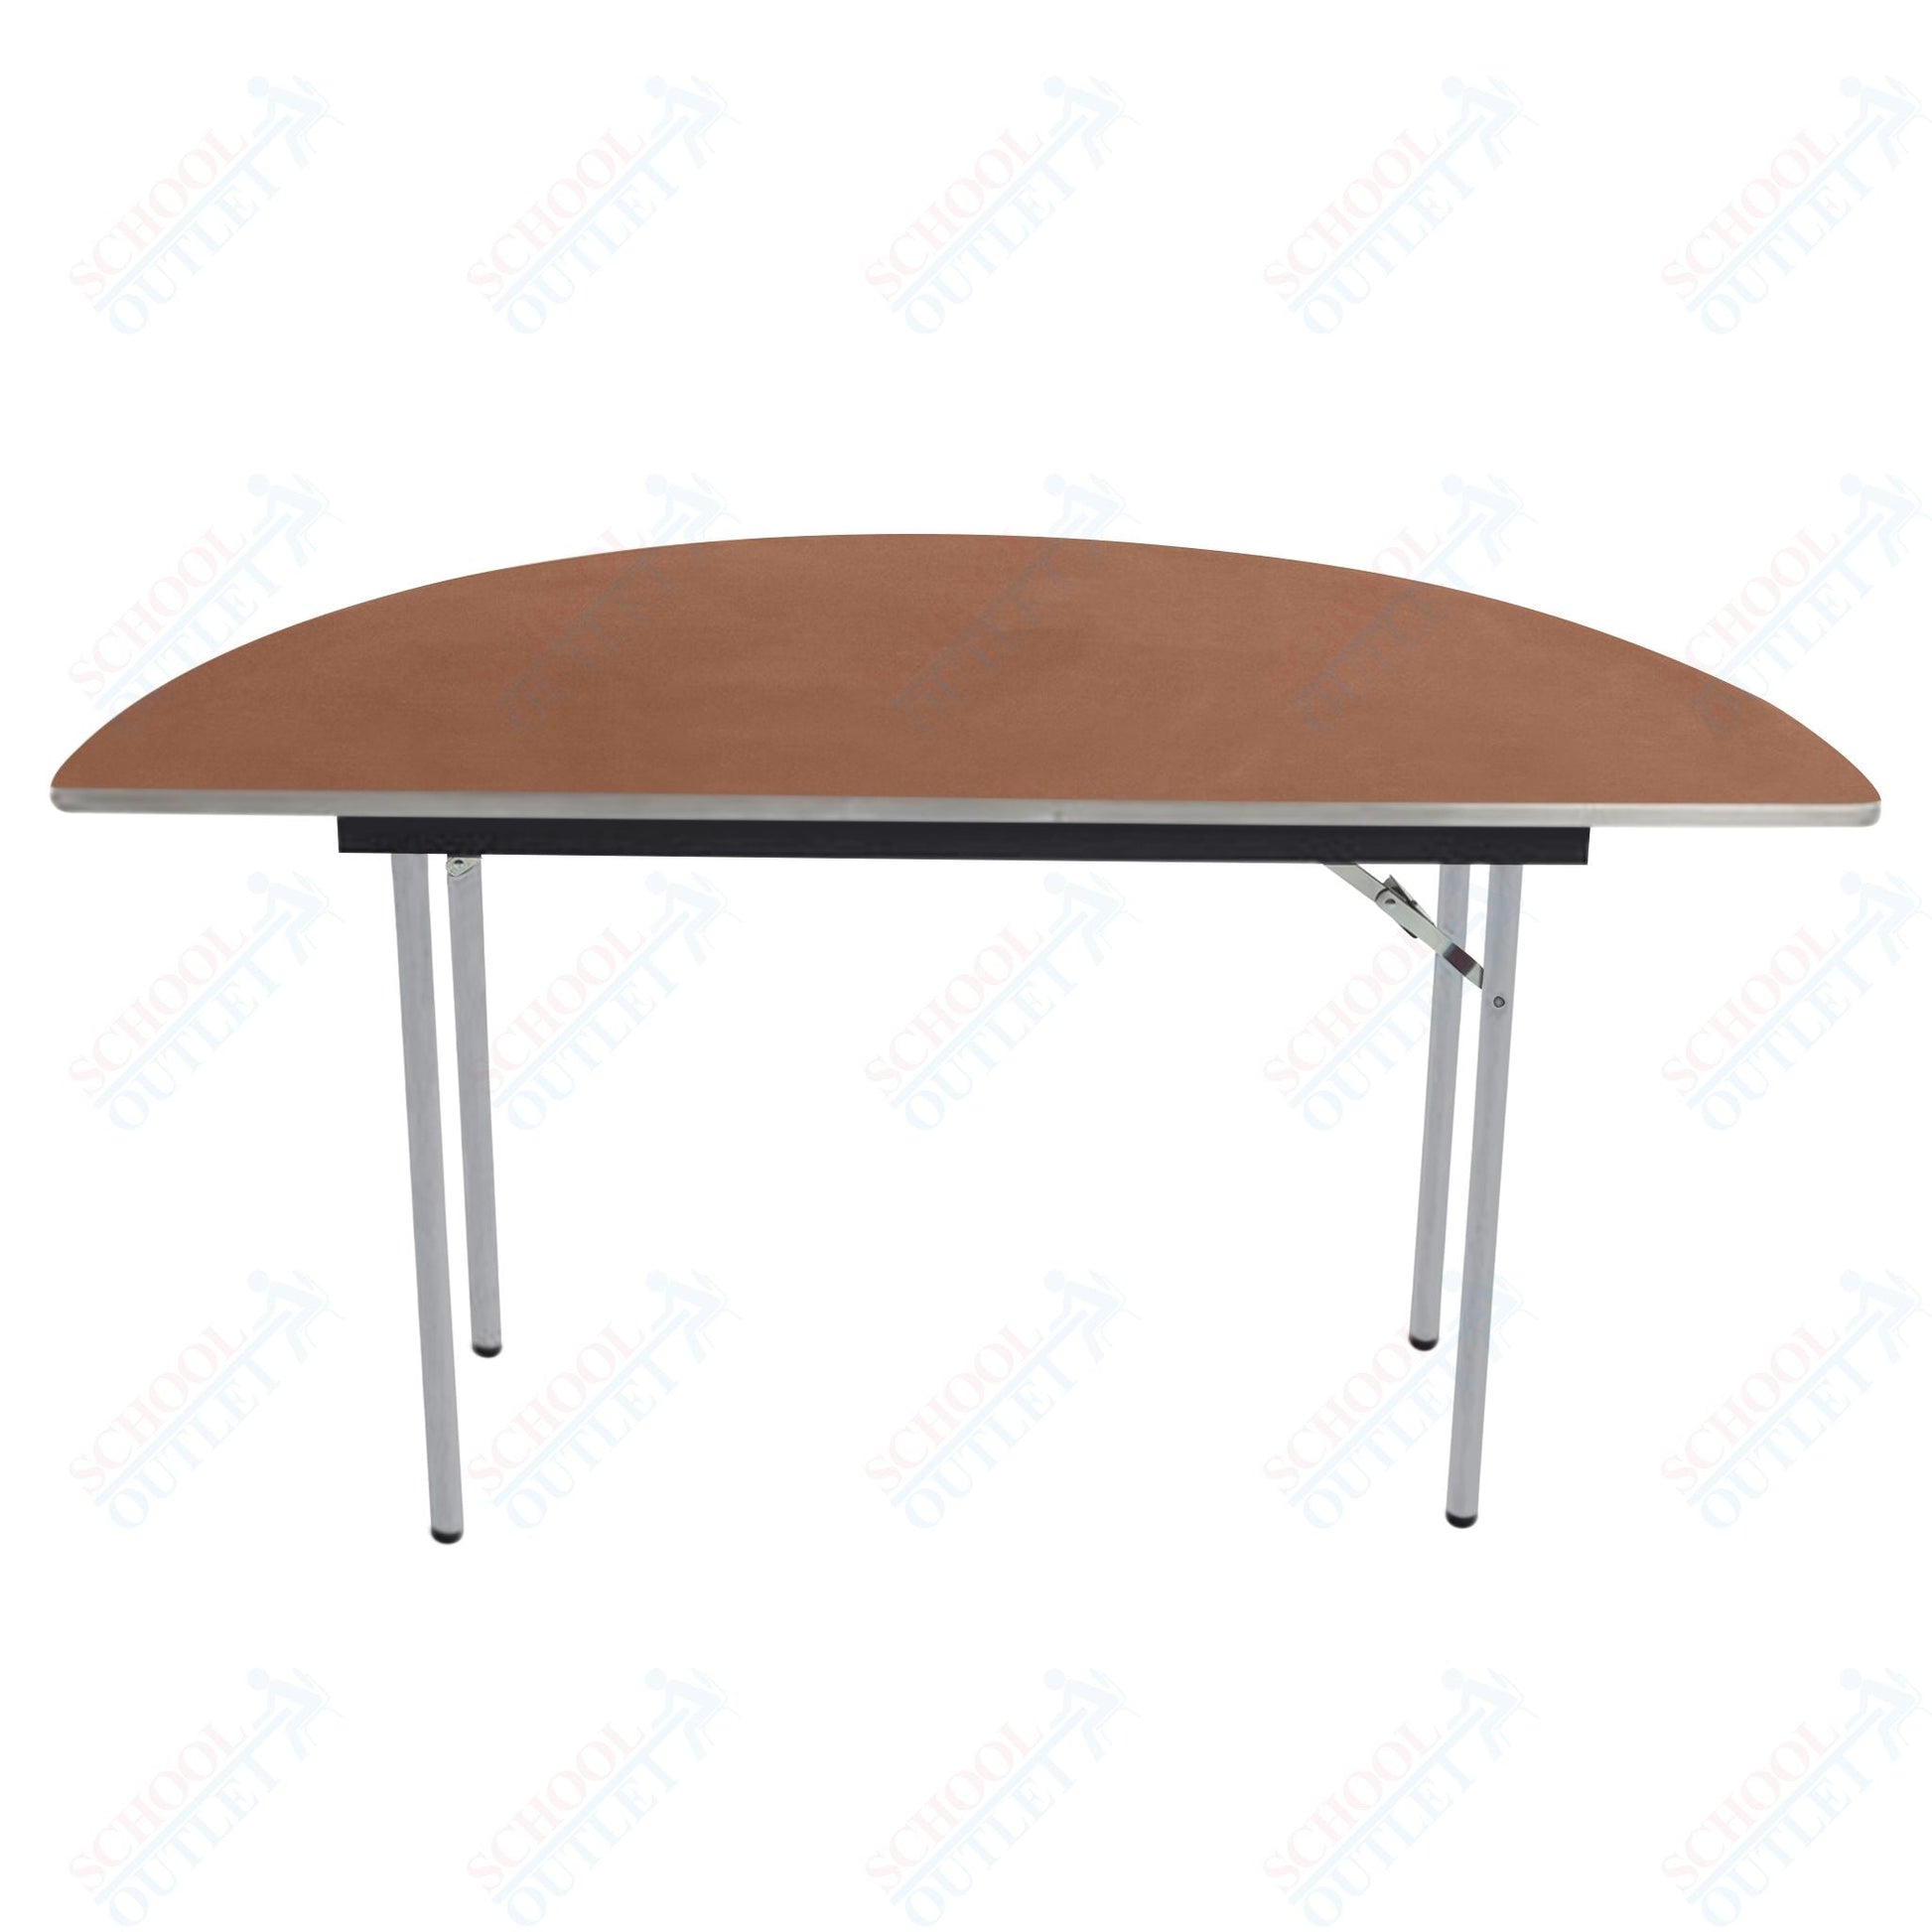 AmTab Folding Table - Plywood Stained and Sealed - Aluminum Edge - Half Round - Half 48" Diameter x 29"H (AmTab AMT - HR48PA) - SchoolOutlet